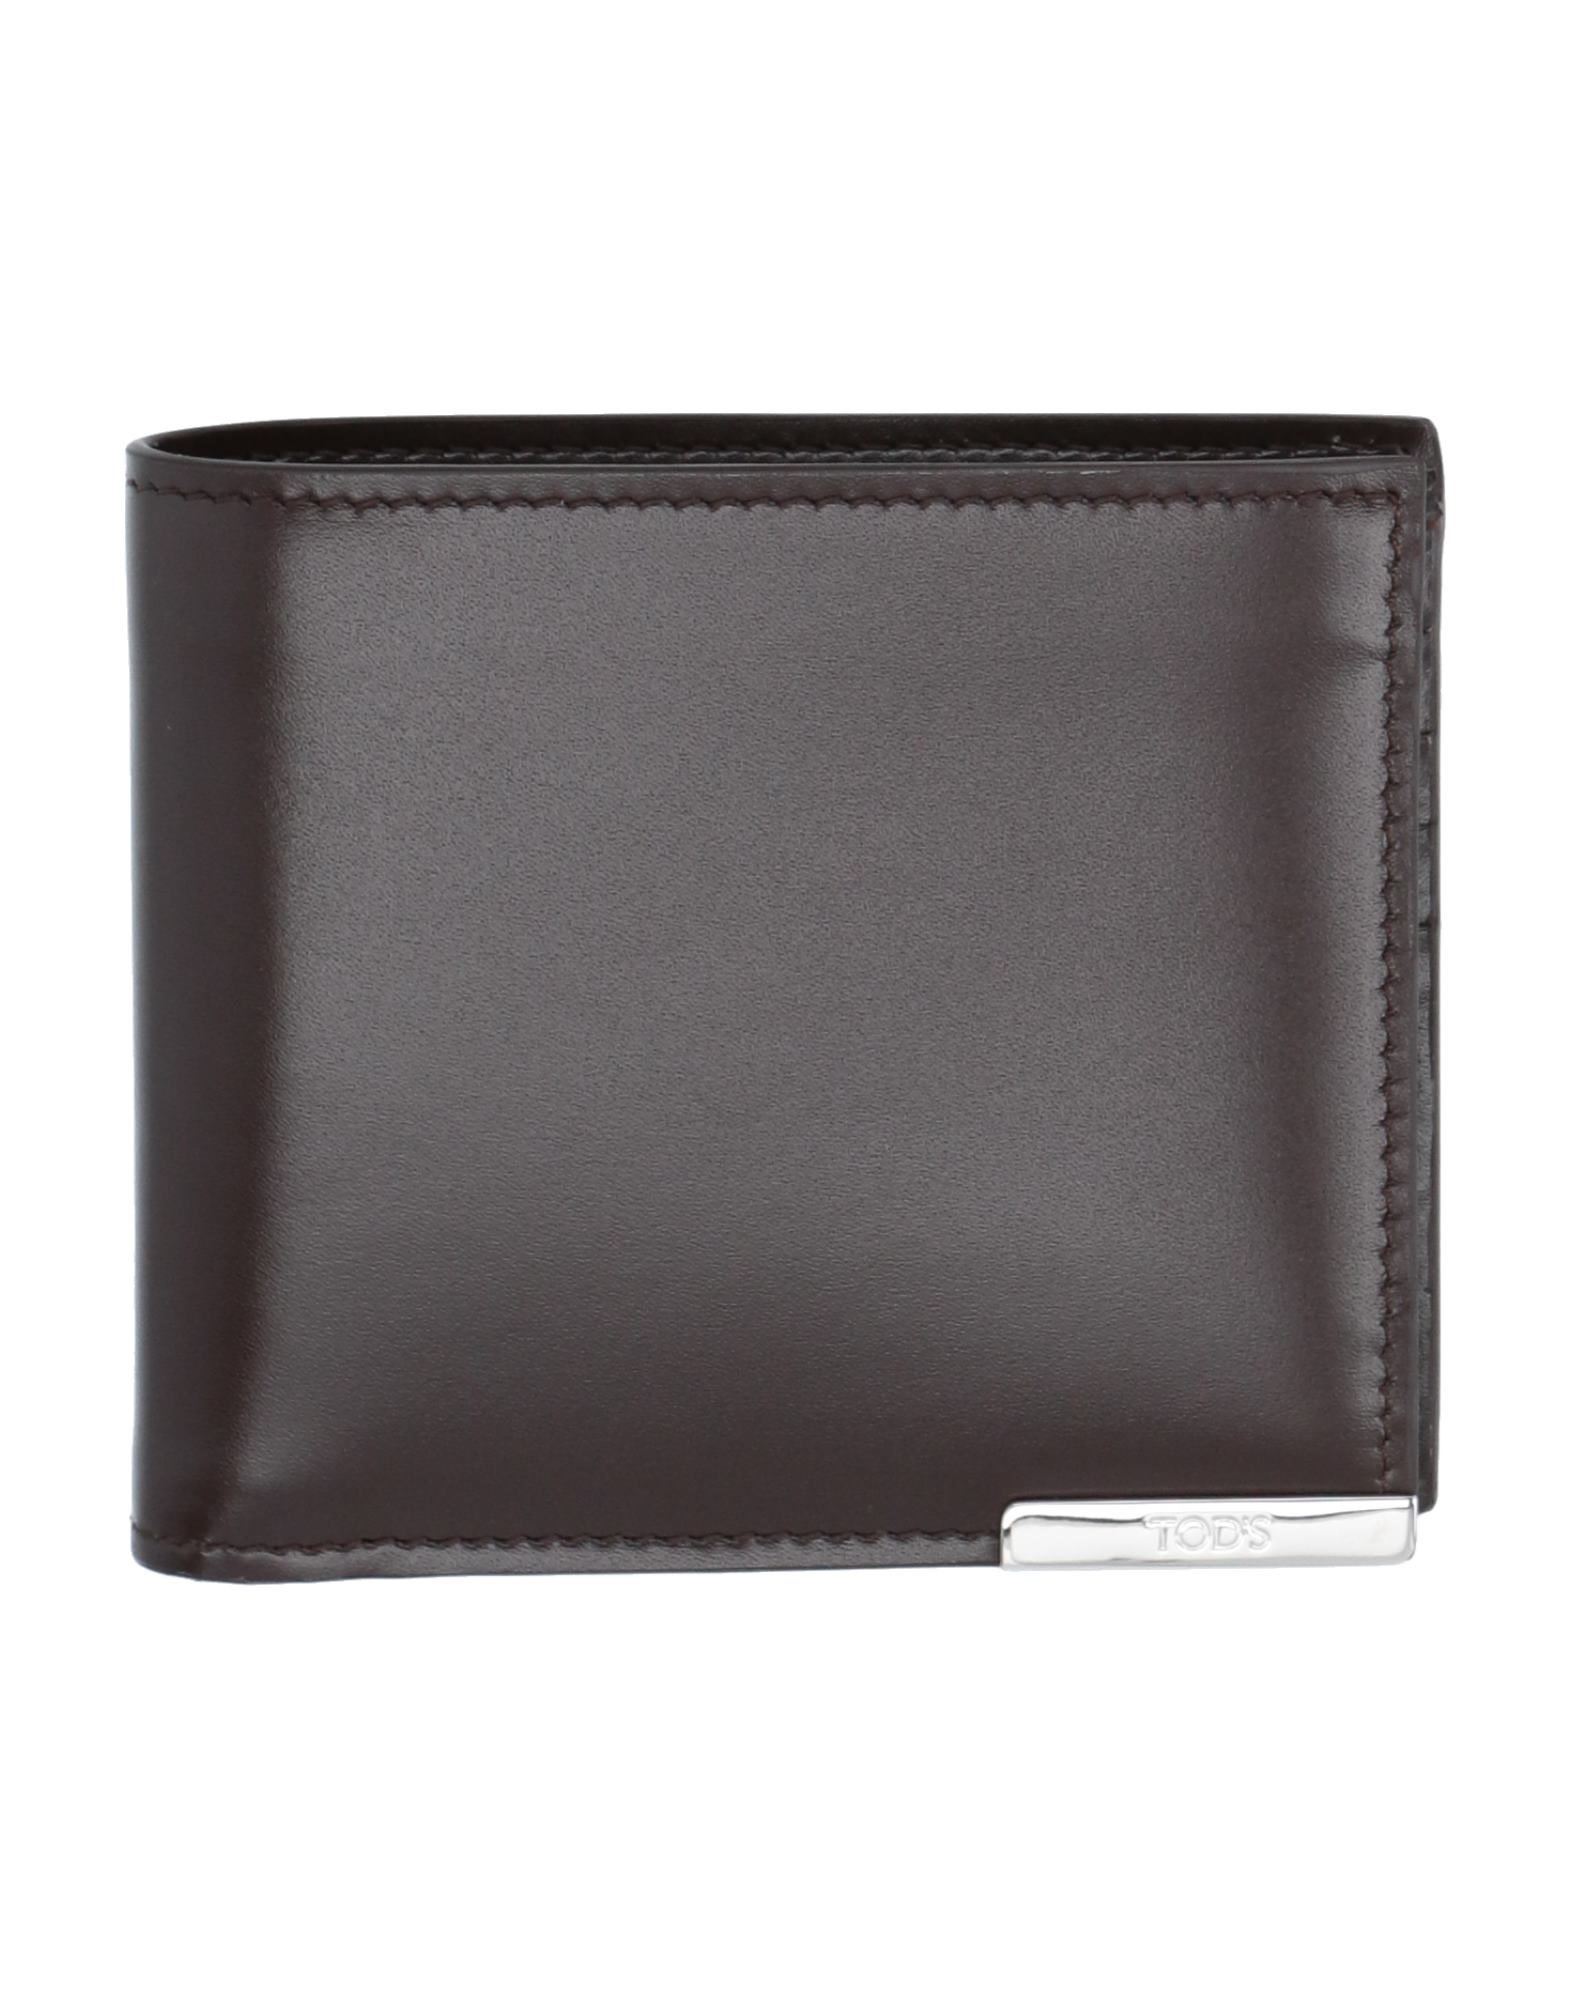 TOD'S Wallets On Sale, Up To 70% Off | ModeSens